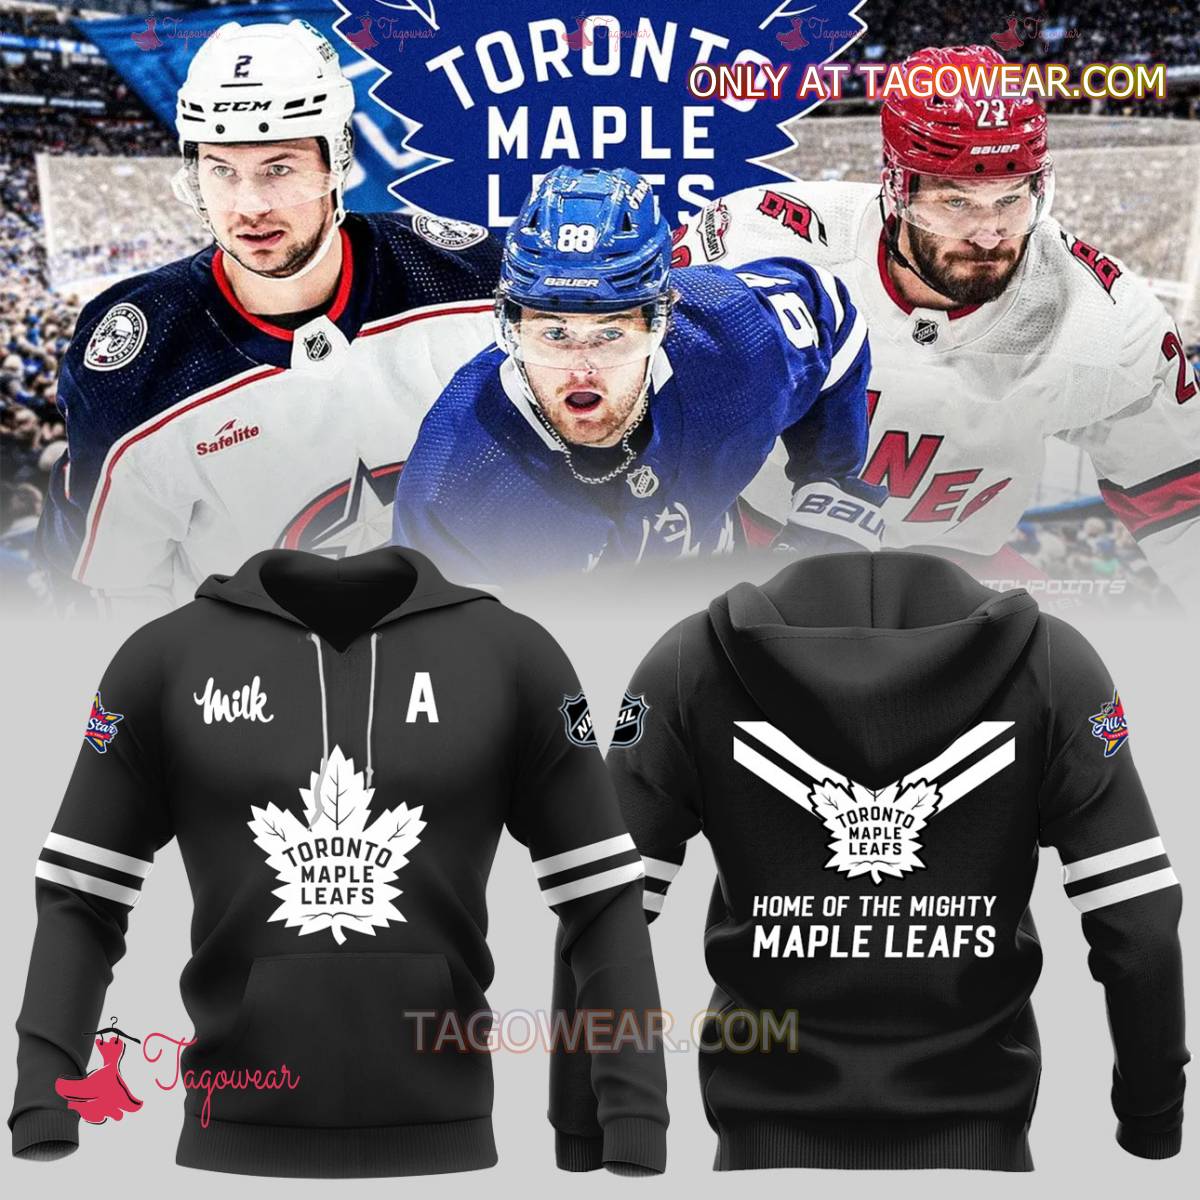 Toronto Maple Leafs Home Of The Mighty Maple Leafs Nhl All-star Hoodie